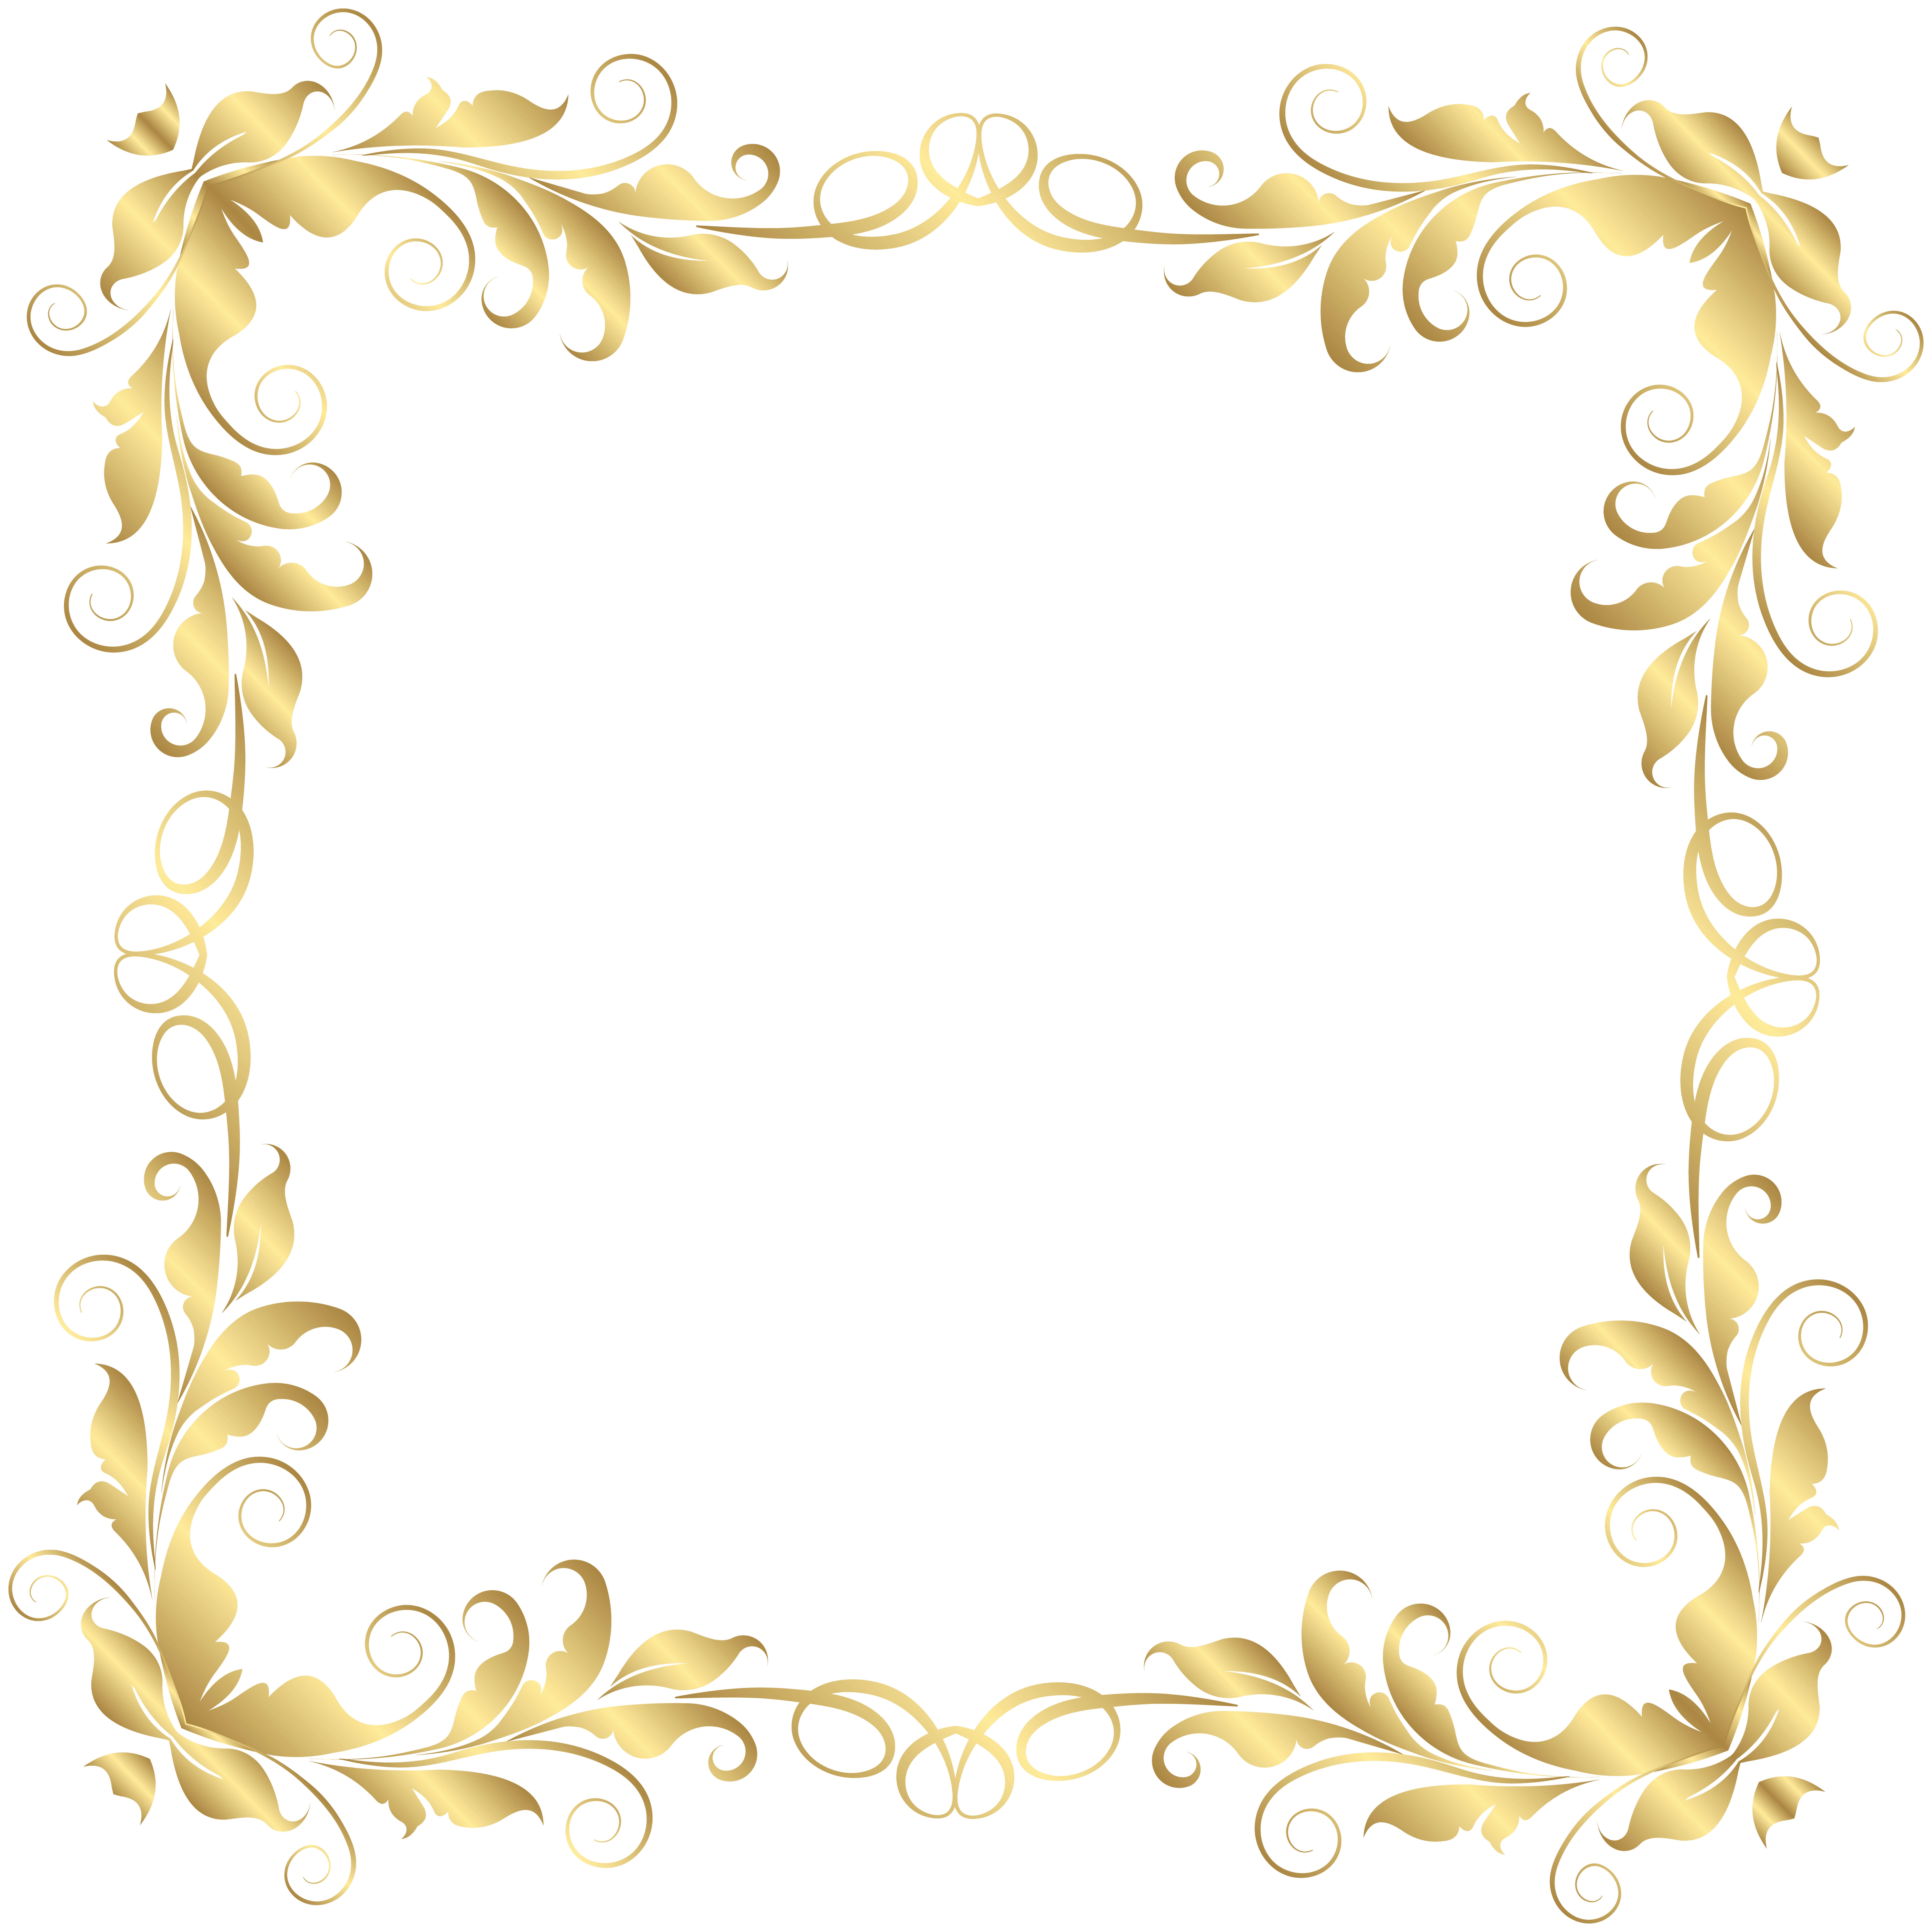 Floral Border Frame PNG Clip Art Image Quality Image And Transparent PNG Free Clipart